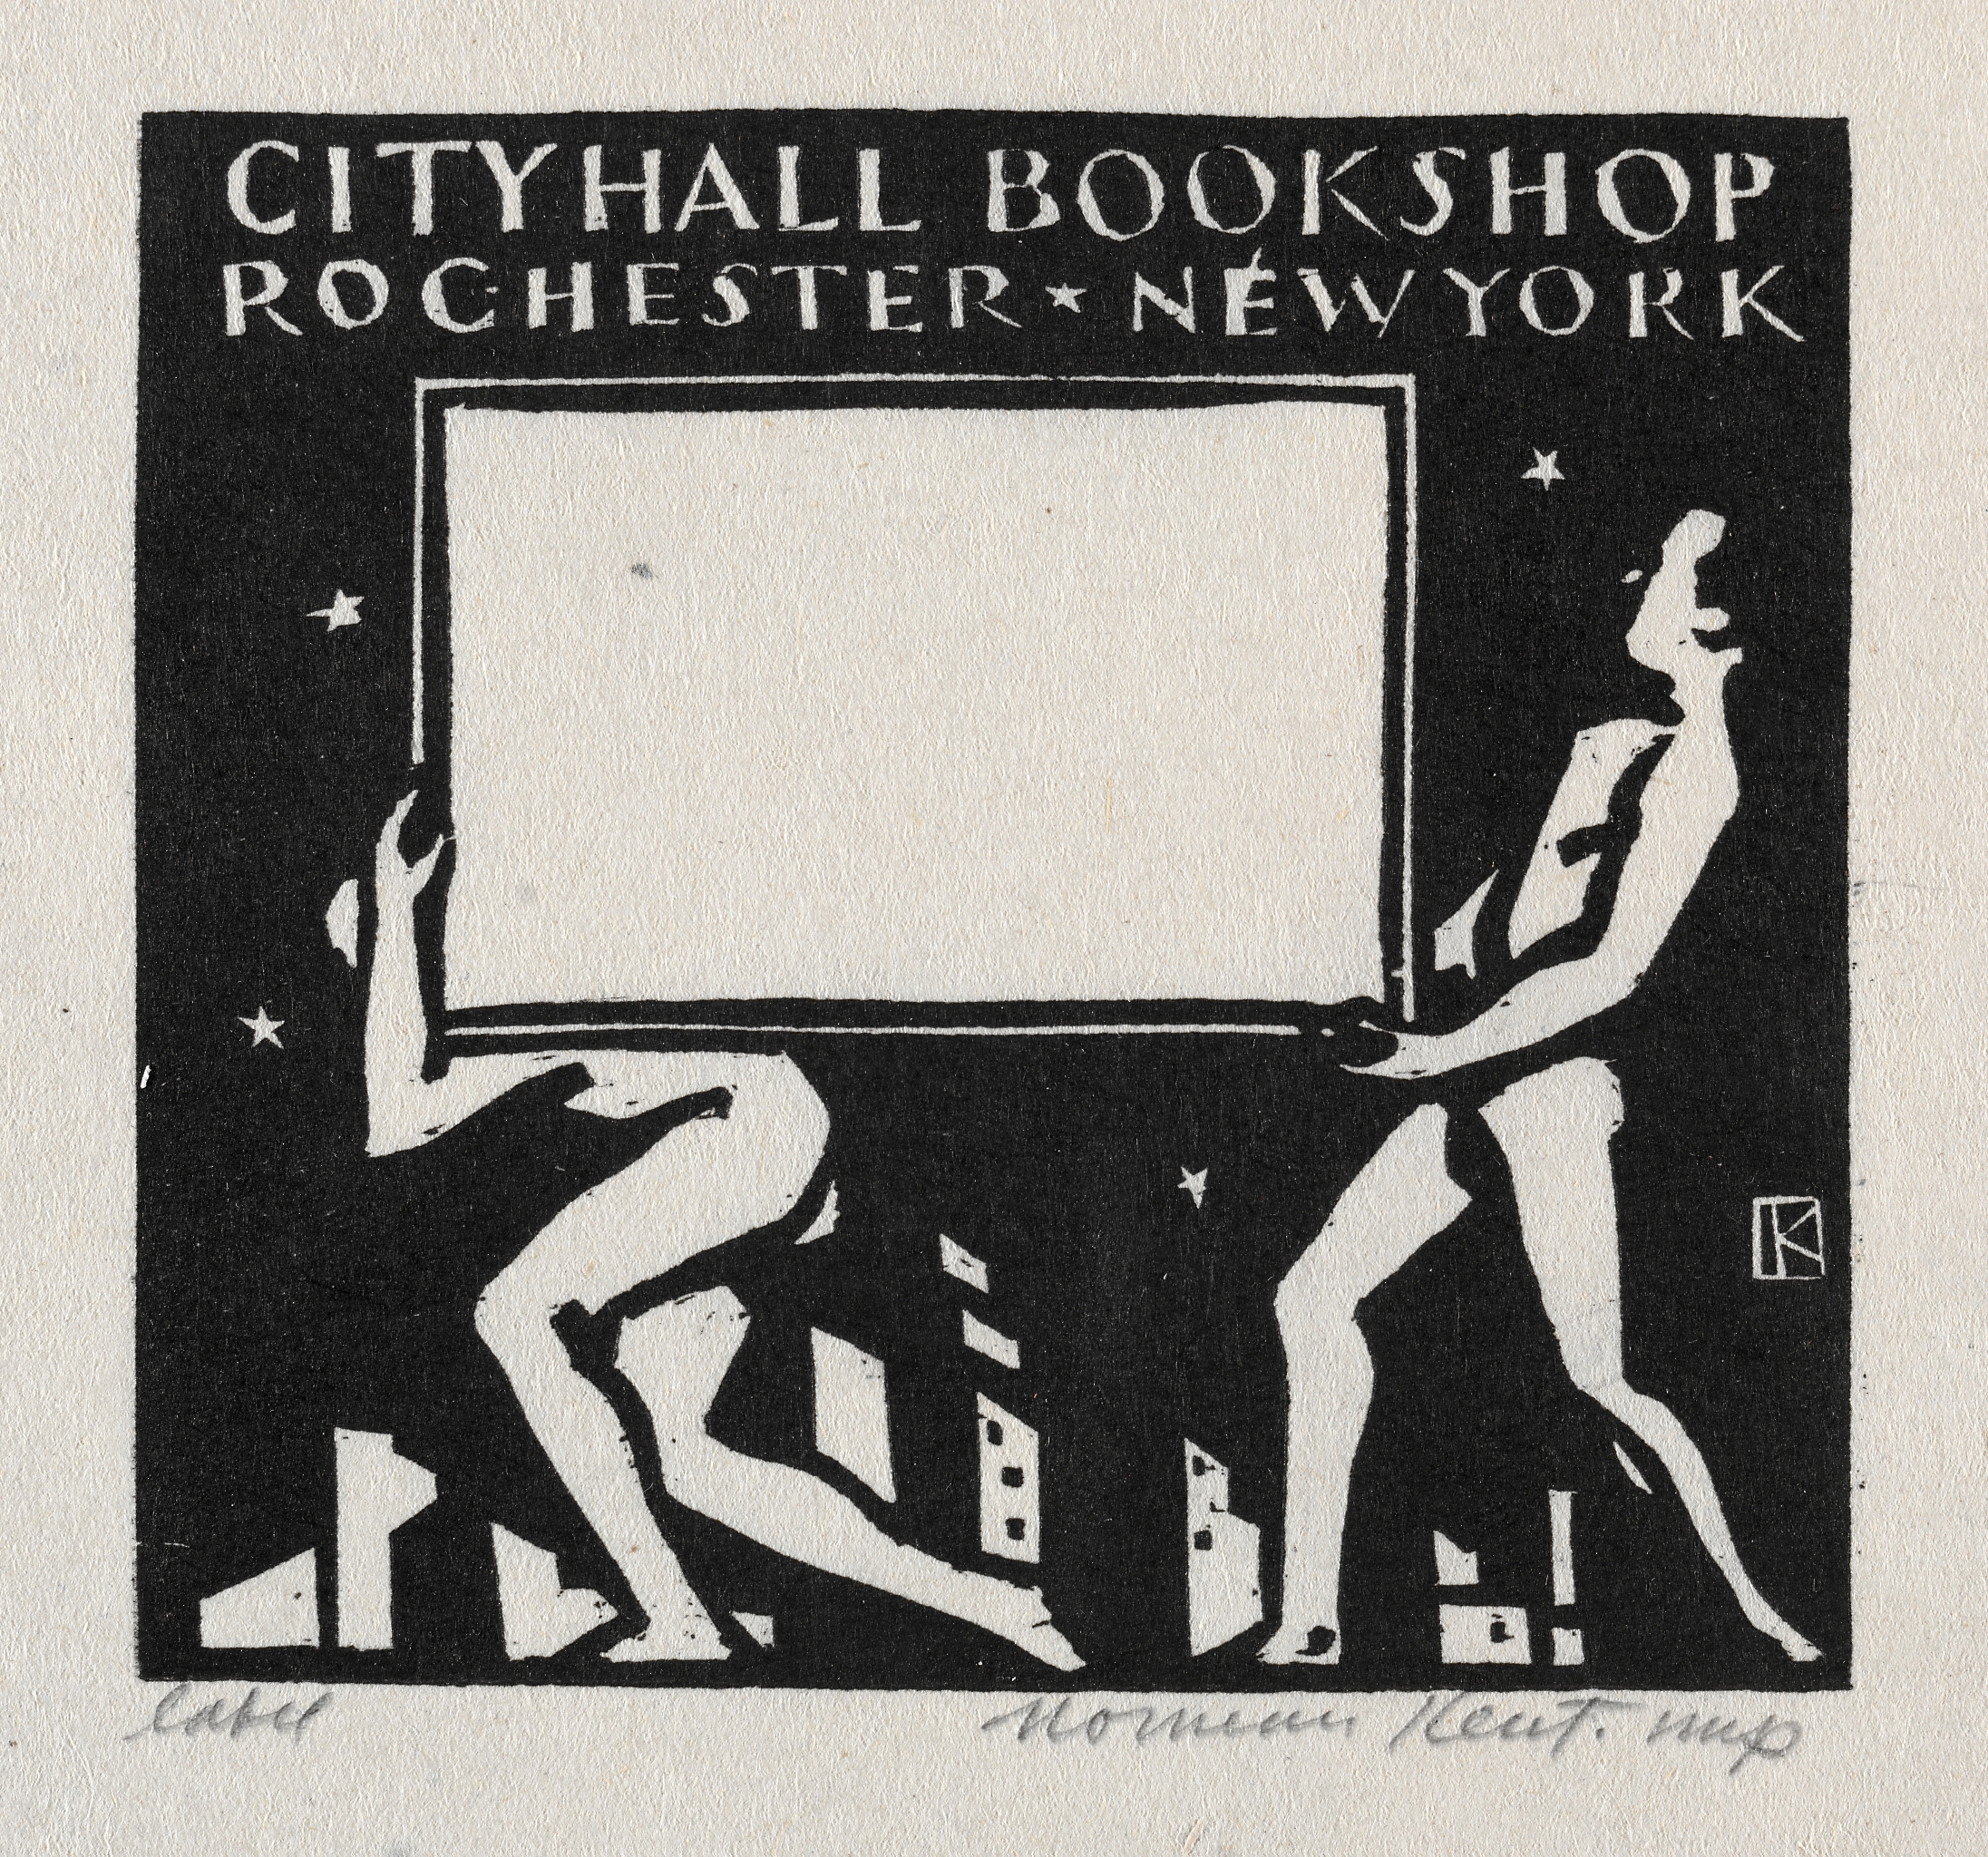 Label for City Hall Bookshop, Rochester, New York